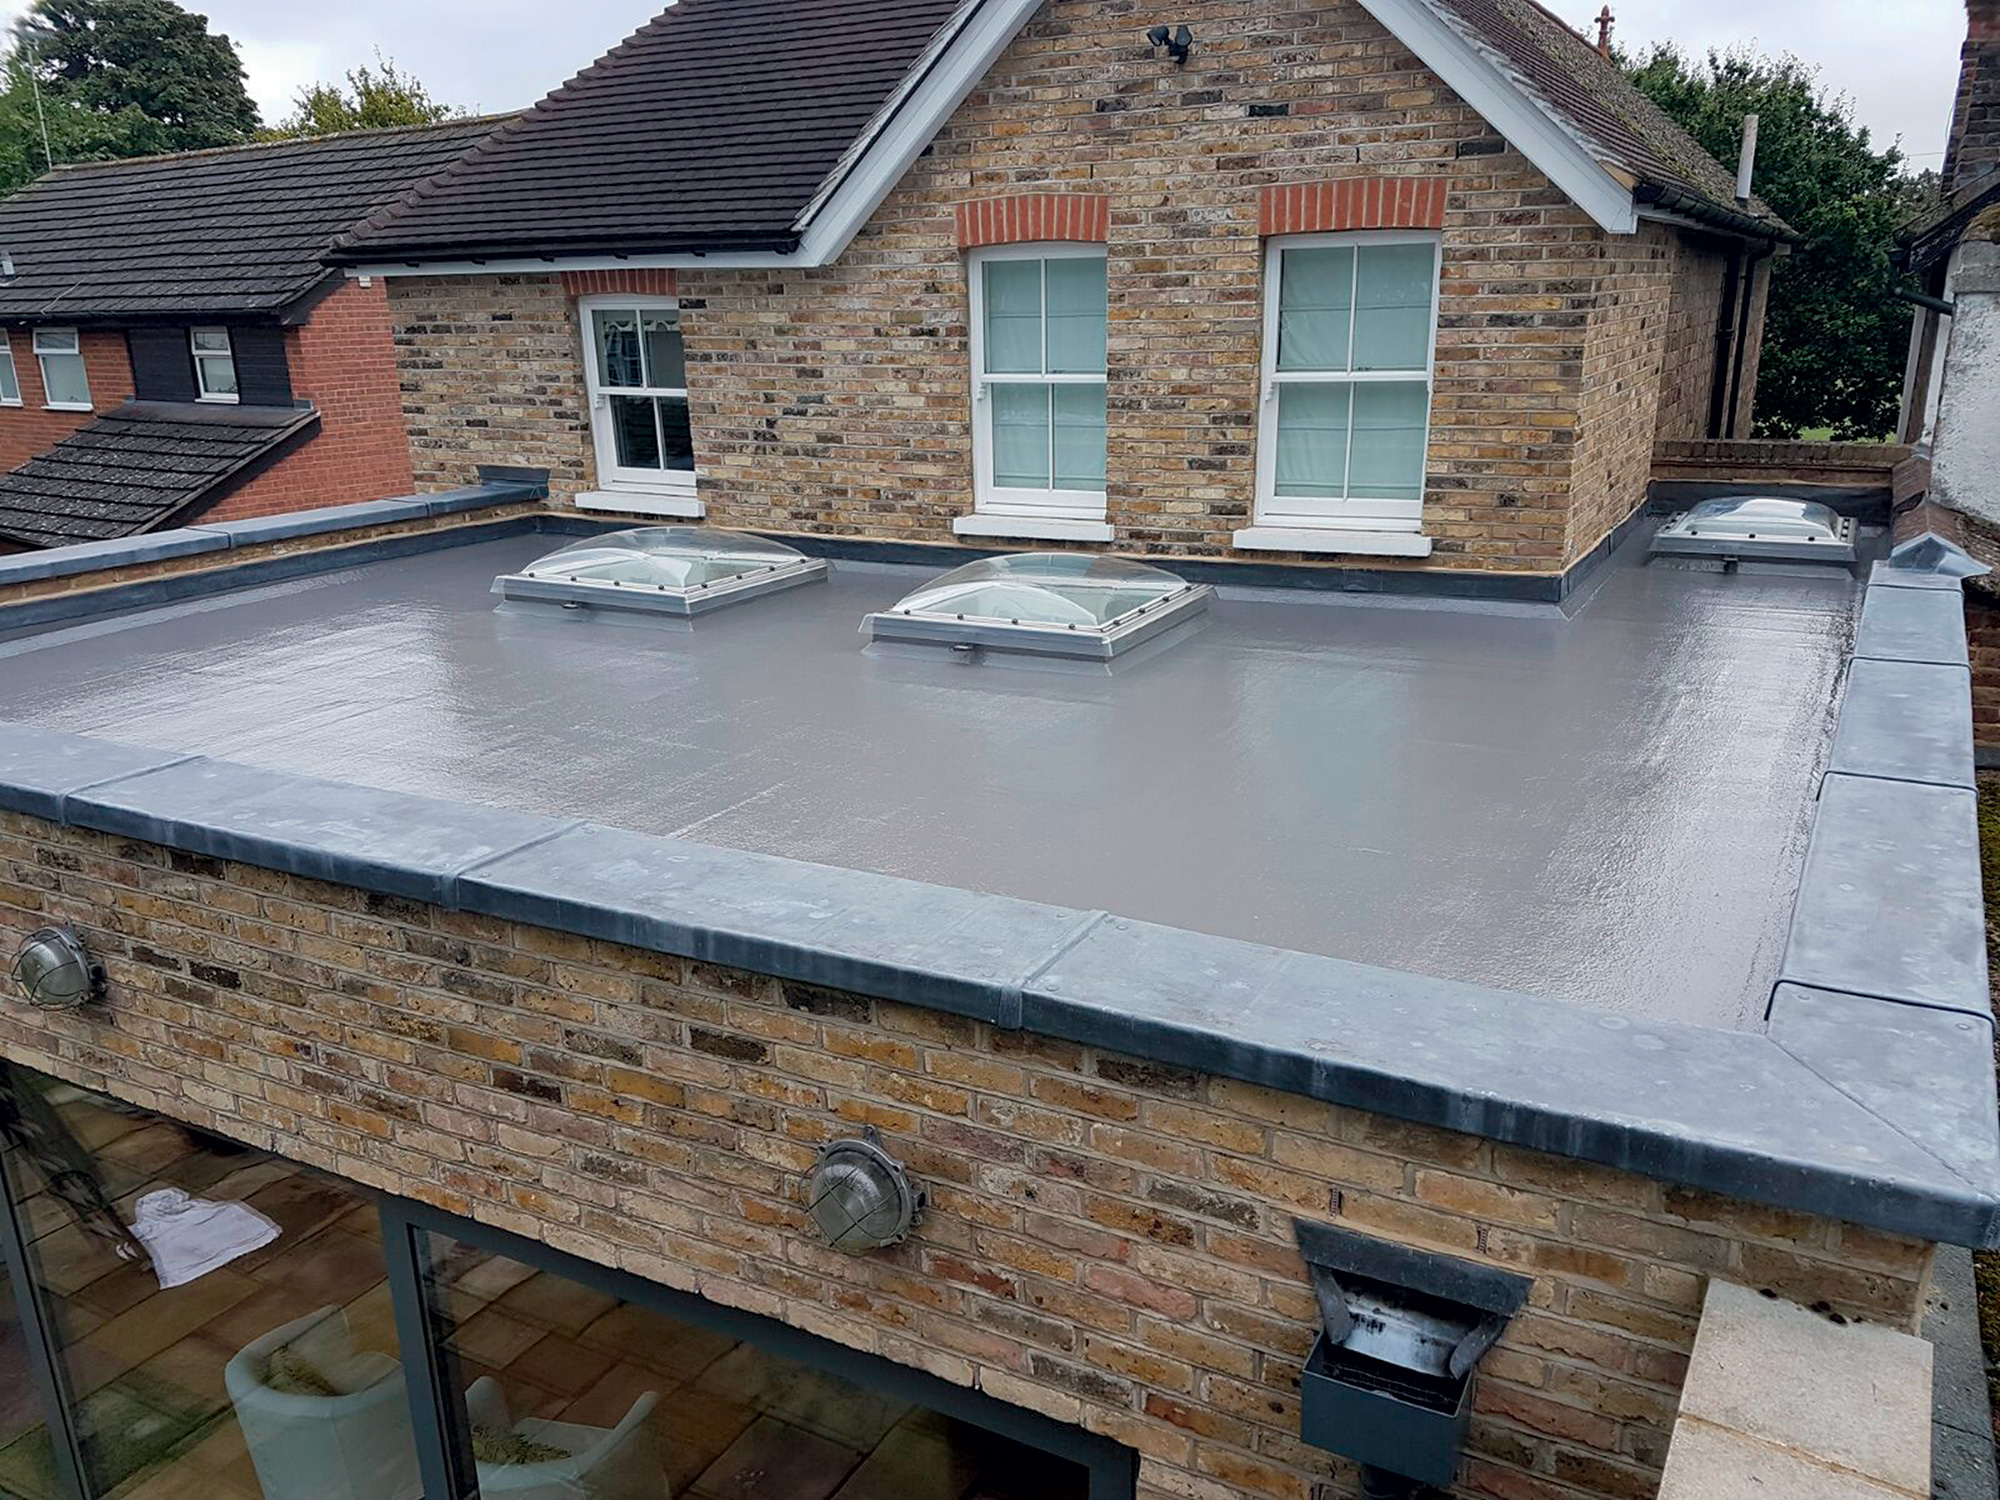 How to Design a Flat Roof for Your Home - Build It